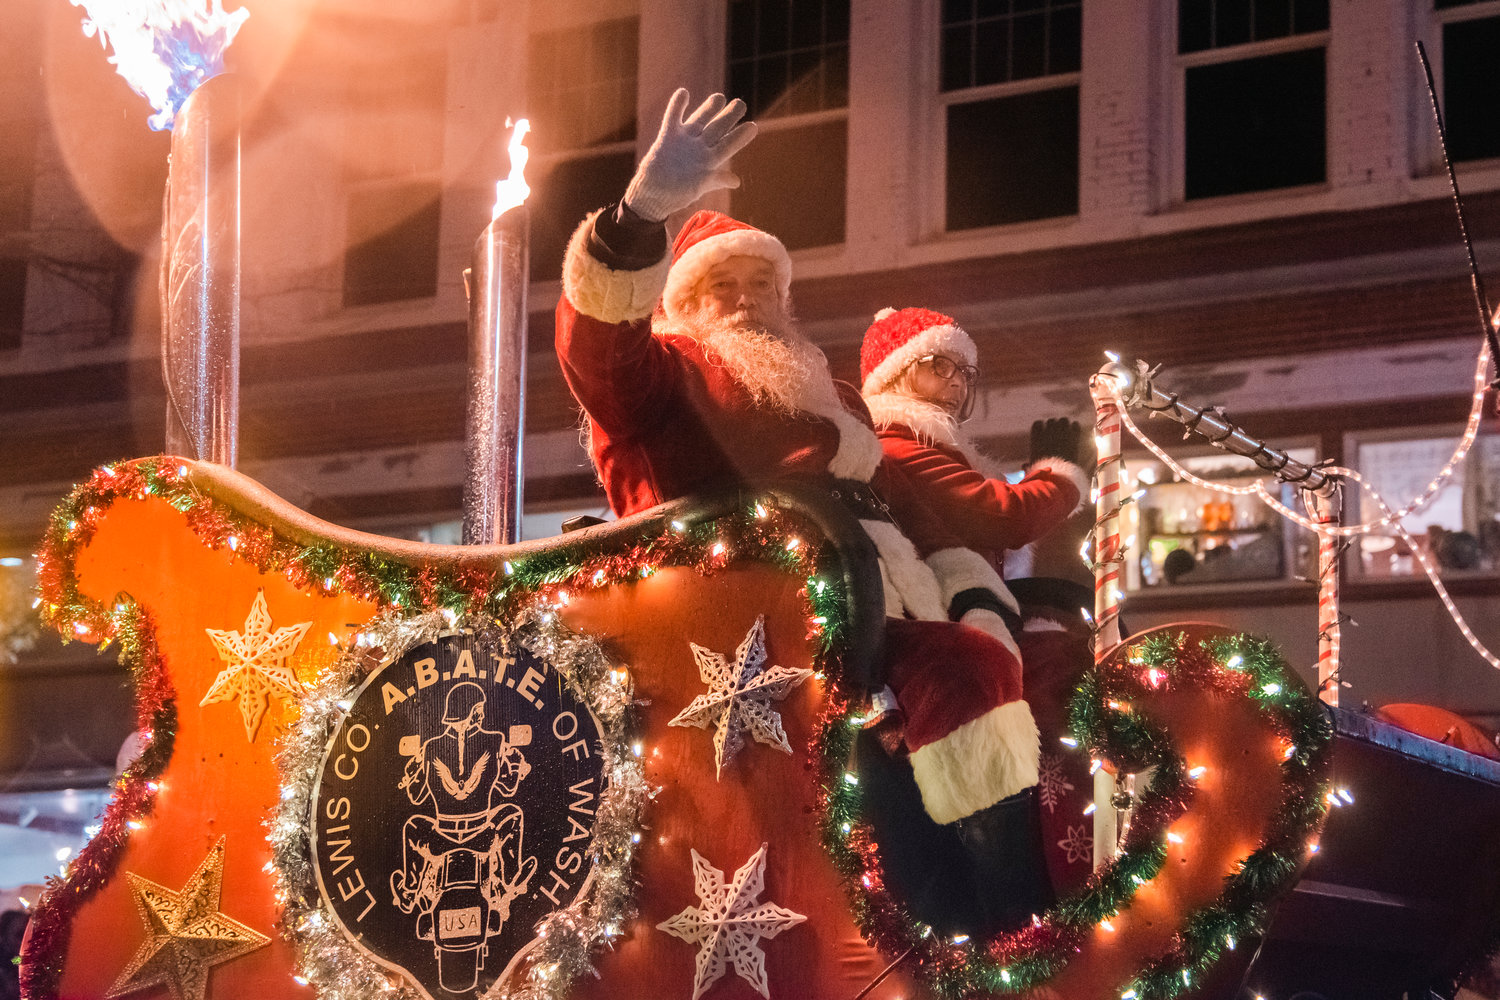 Santa and Mrs. Claus wave to parade-goers from the Lewis County A.B.A.T.E of Washington float during the Lighted Tractor Parade in Centralia Saturday night.